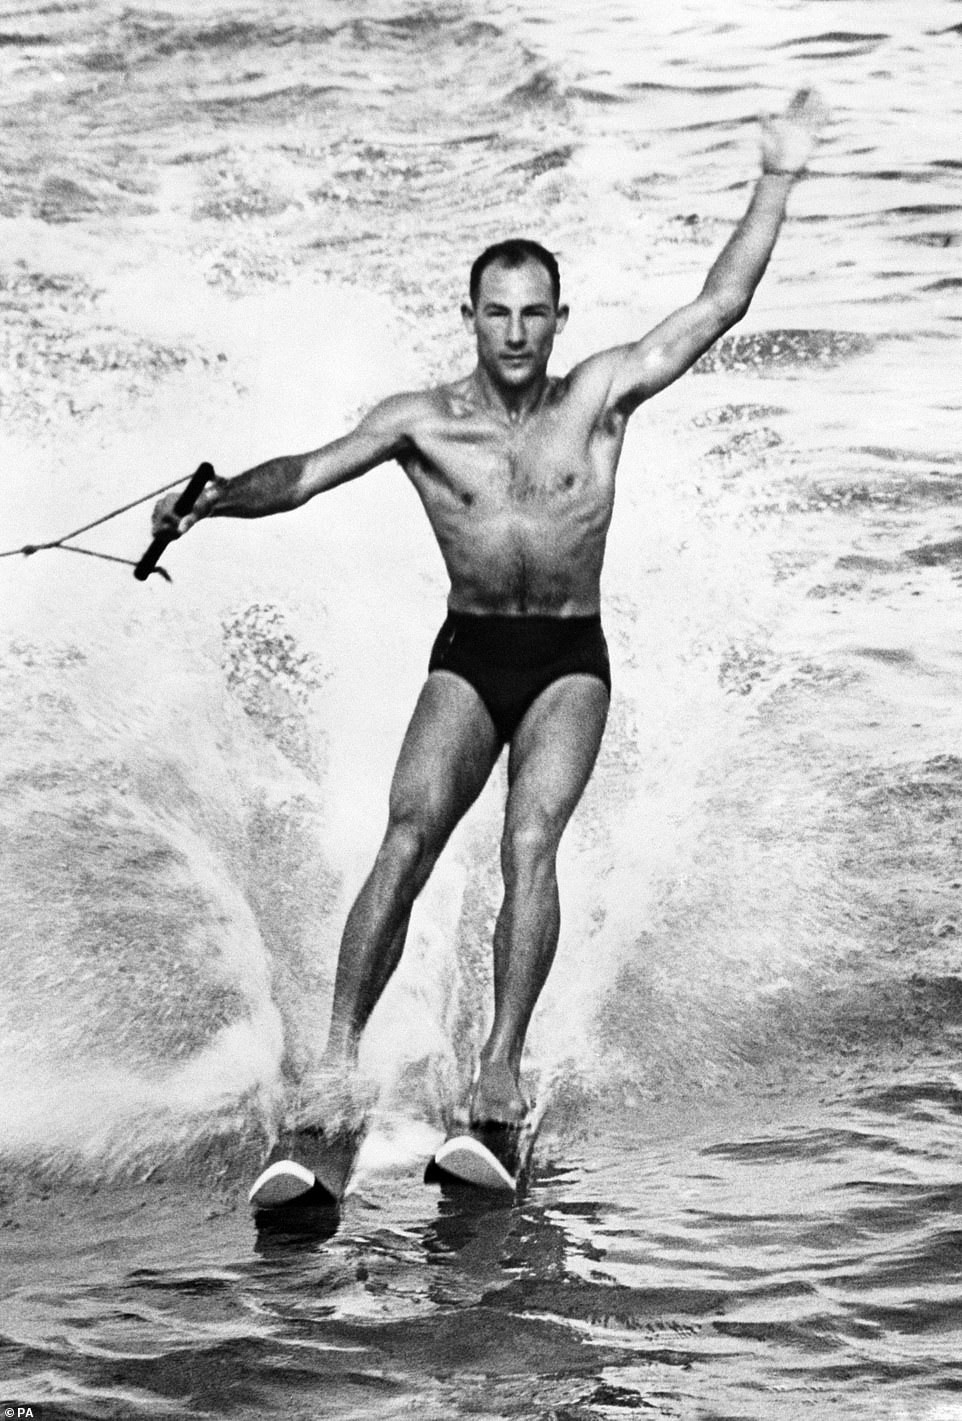 The Brit trades the car for some water-skiing, while on holiday in sunny Bahamas, back in March 1955.